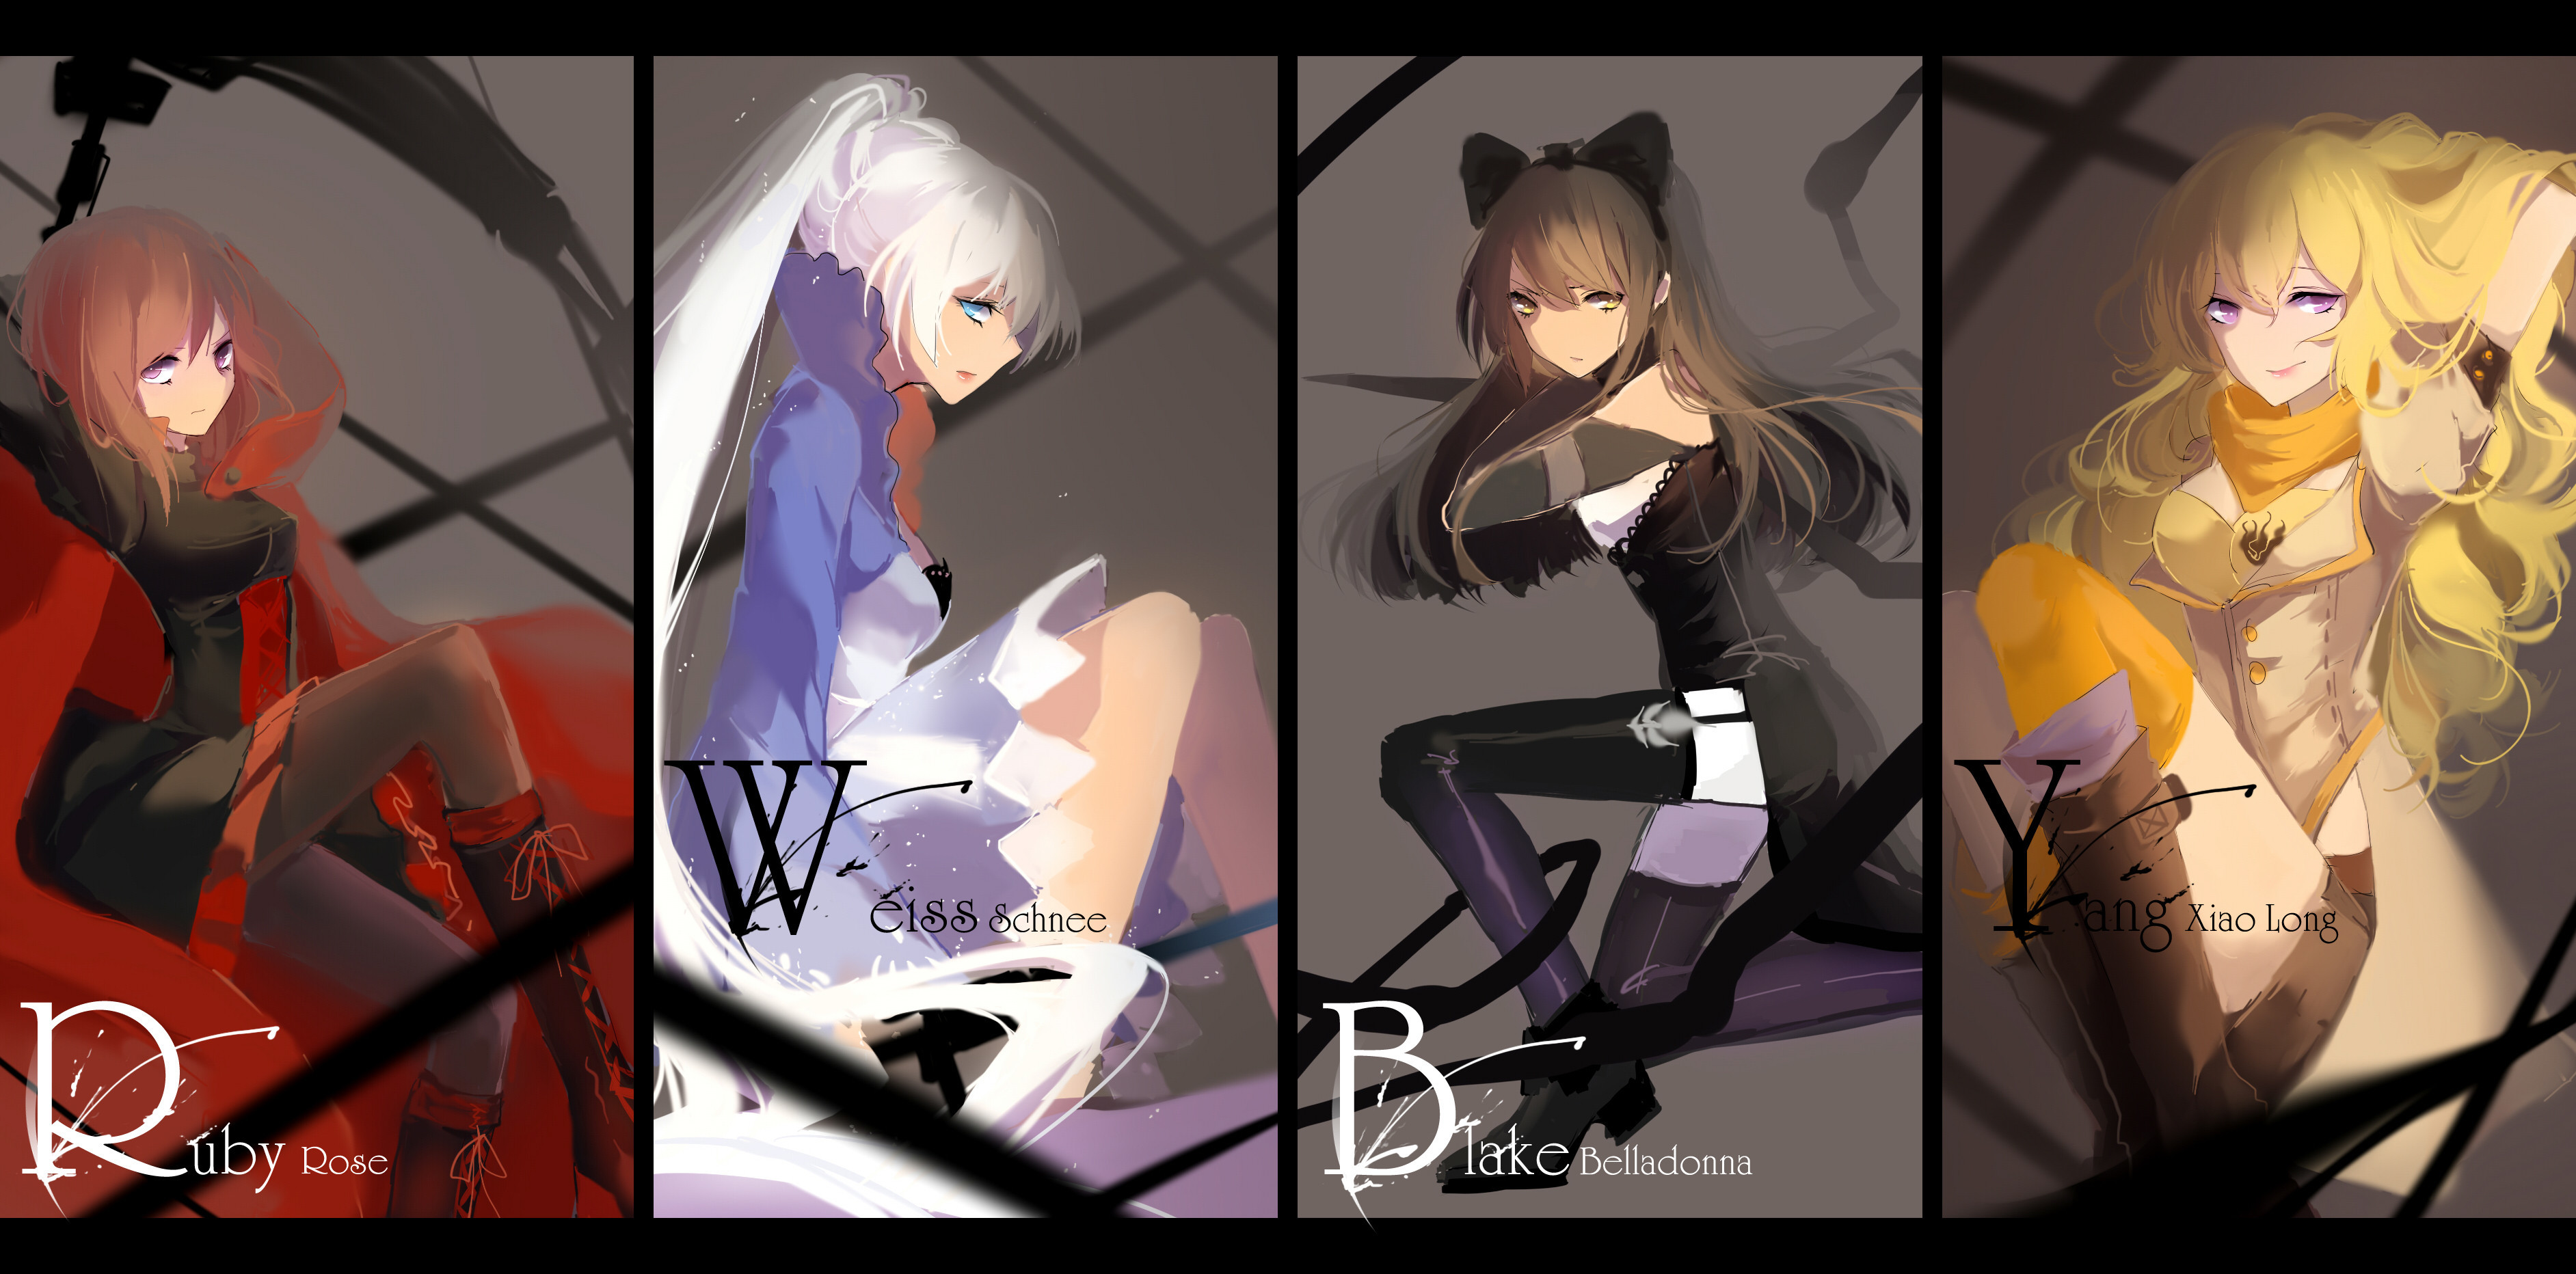 Anime RWBY Weiss Schnee Ruby Rose character Blake Belladonna Yang Xiao Long collage